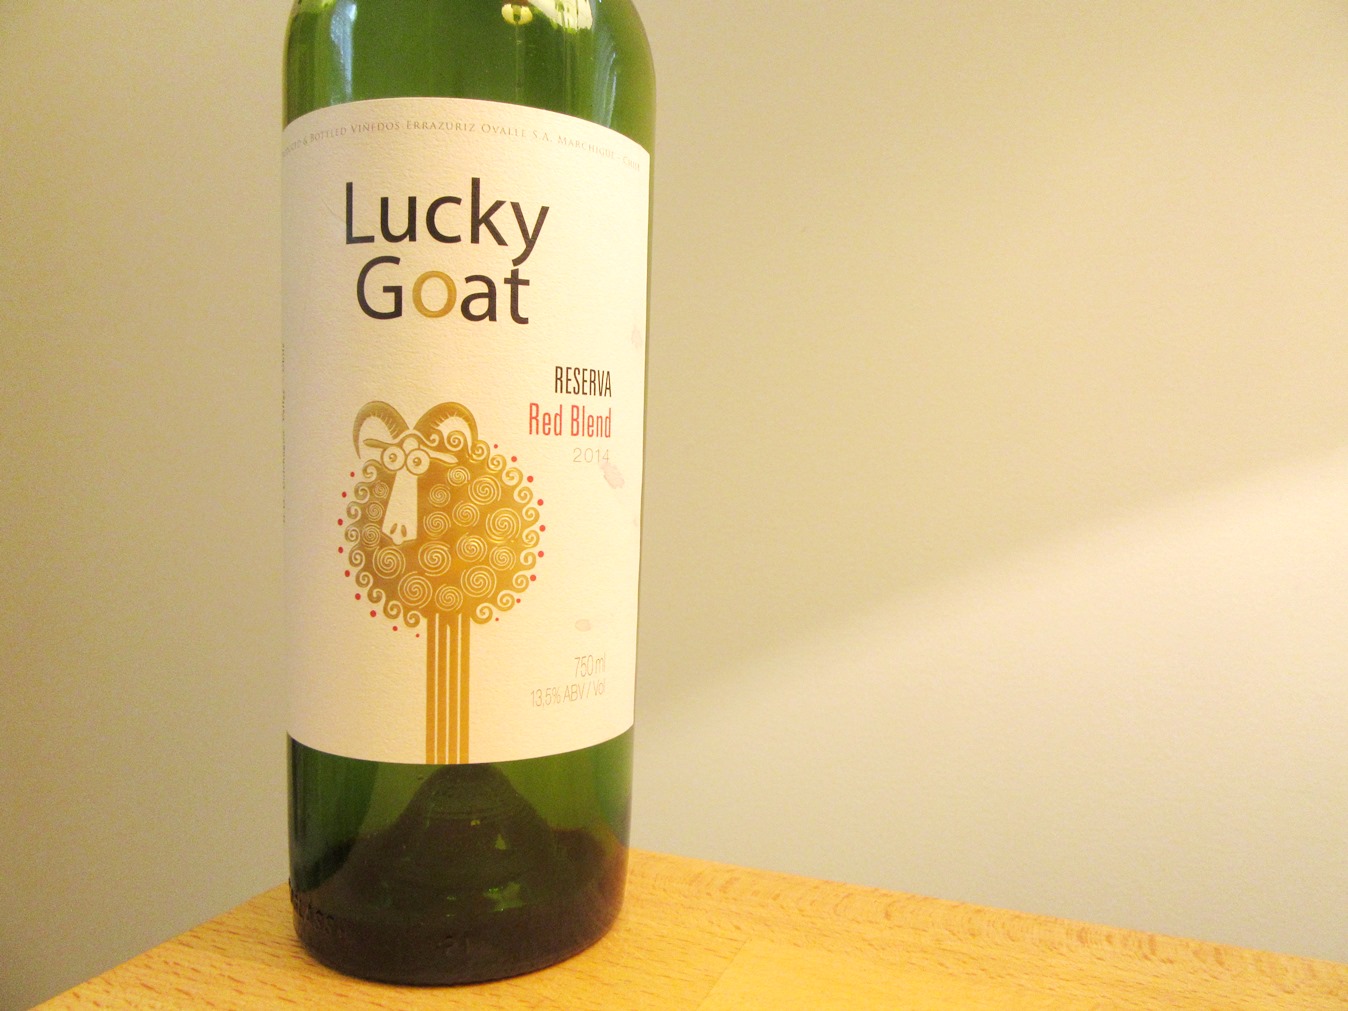 Photo Credit: Wine Casual, Lucky Goat, Reserva Red Blend 2014, Colchagua Valley, Chile